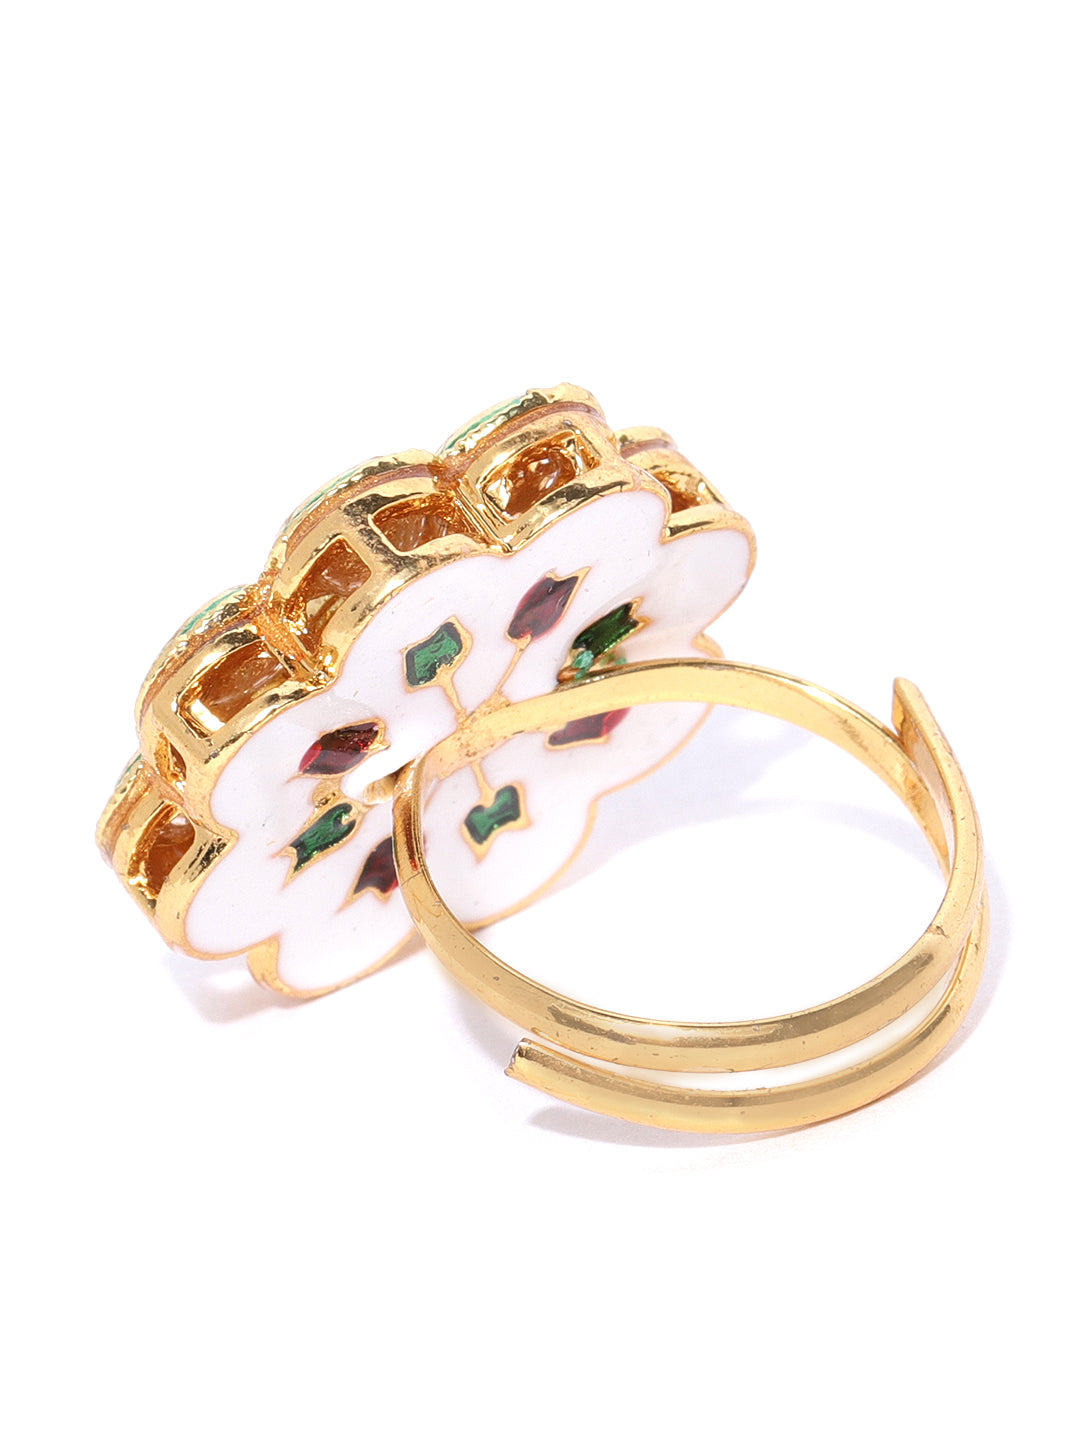 Gold-Plated Kundan Studded Adjustable Ring in Floral Pattern